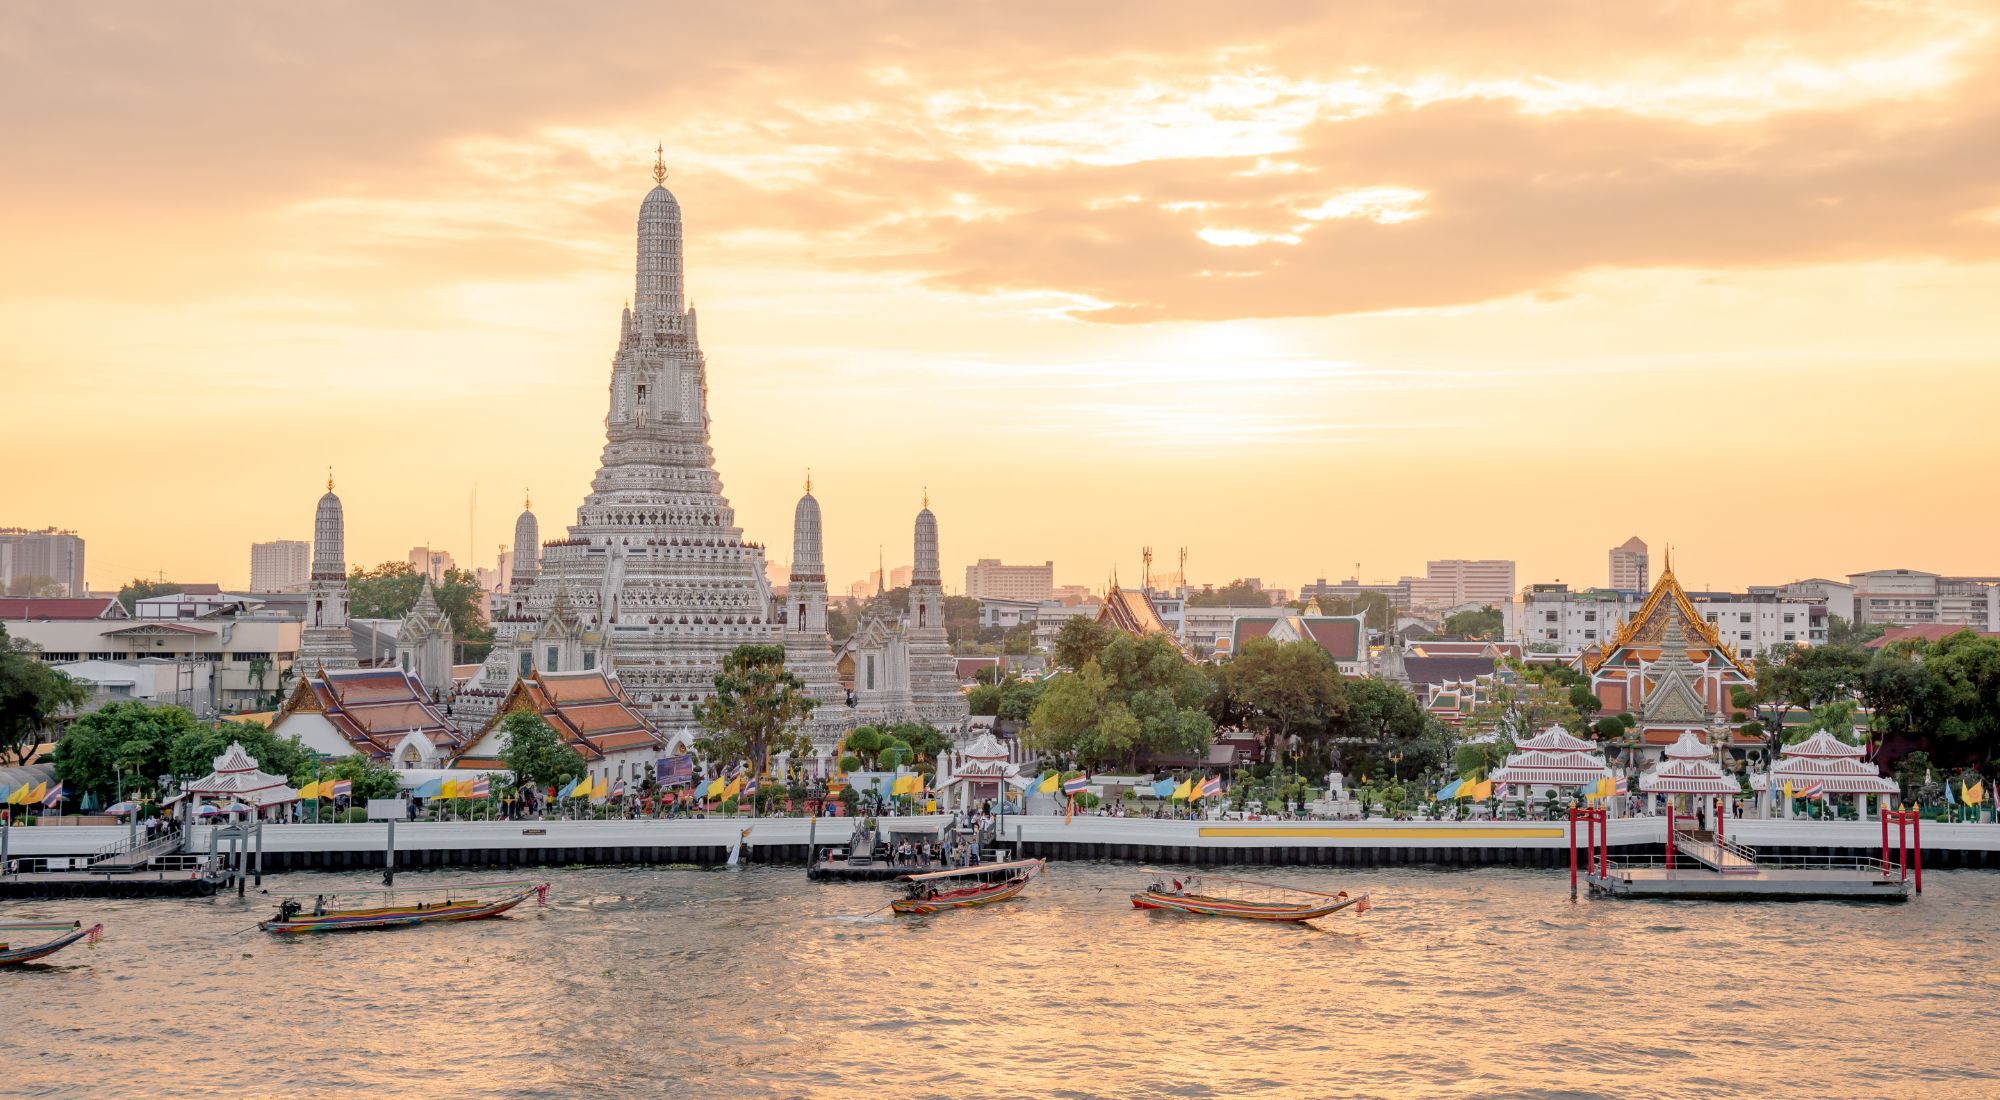 View on Chao Phraya river and Wat Arun